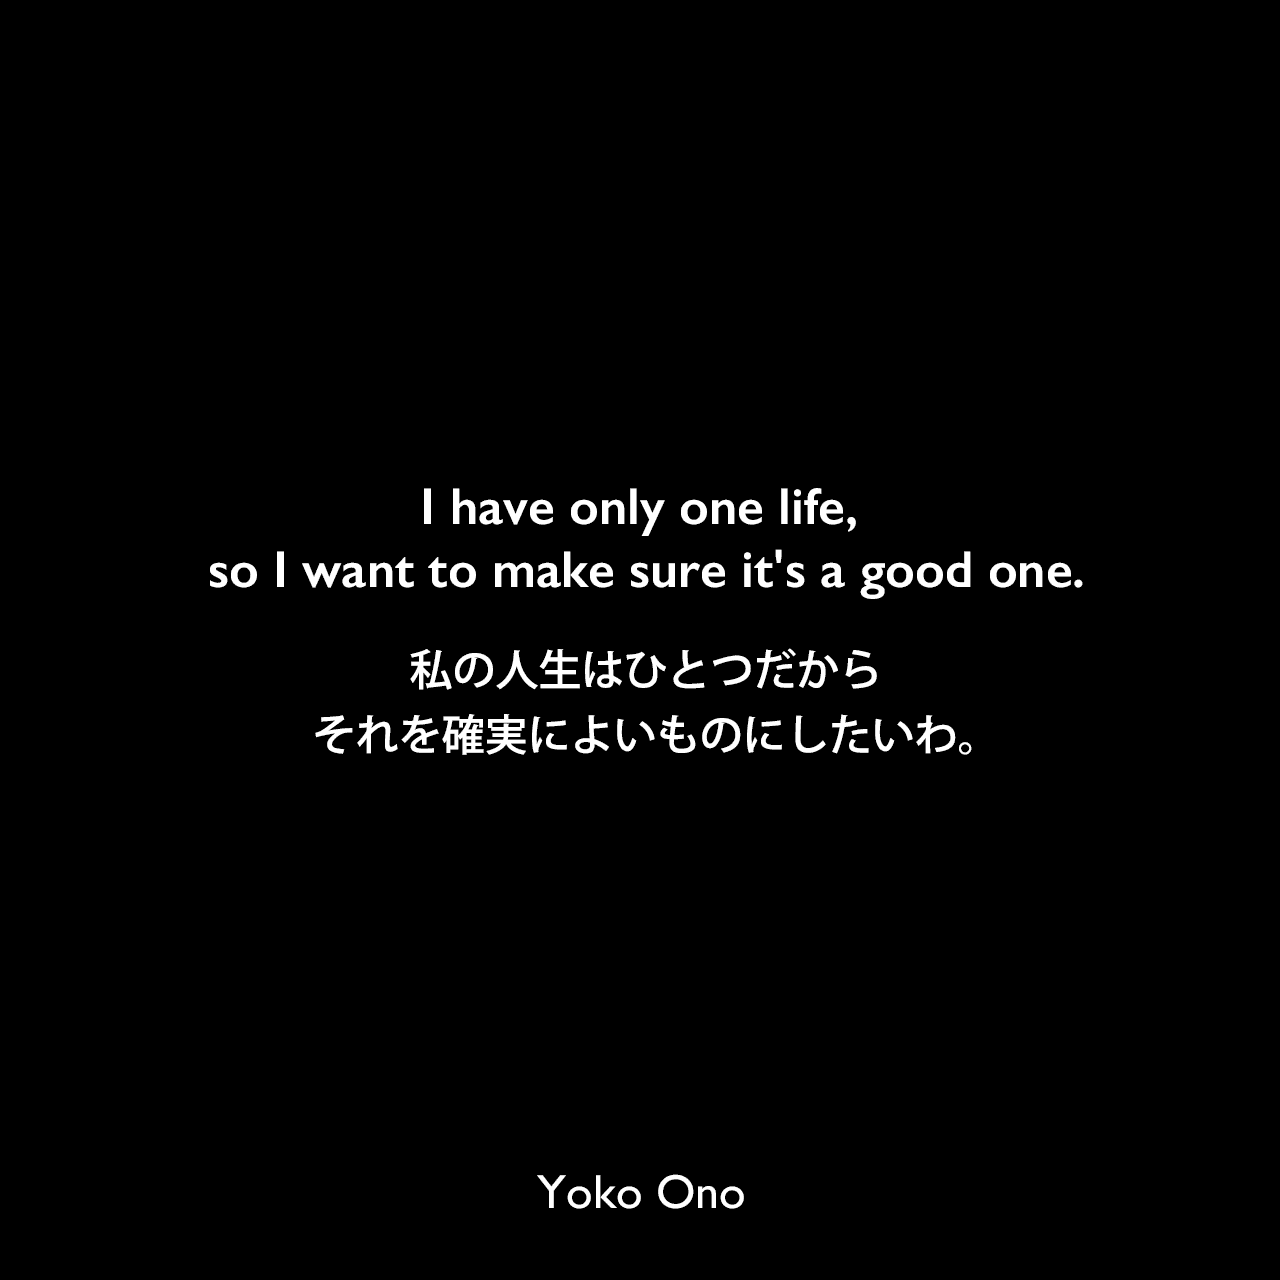 I have only one life, so I want to make sure it's a good one.私の人生はひとつだから、それを確実によいものにしたいわ。Yoko Ono